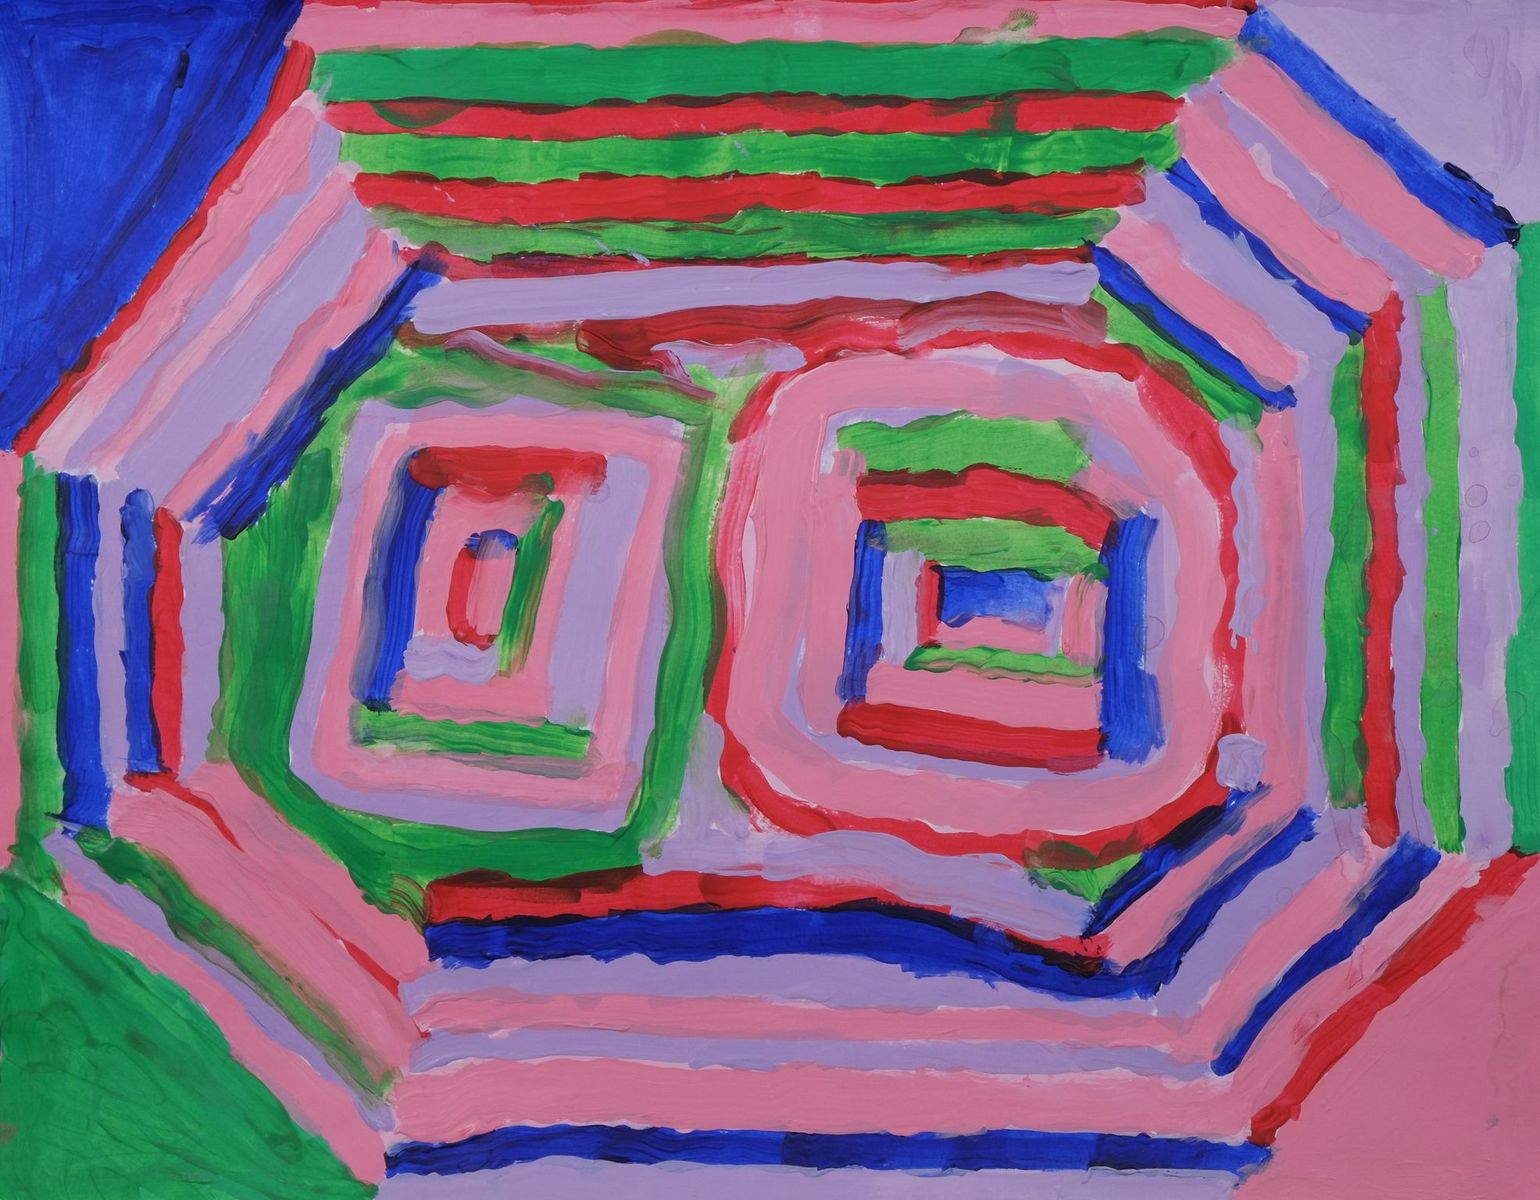 In the center, there are two squares, each side is alternating in light purple, pink, green, blue, and red. Surrounding the squares in a radiating outline of an octagon 